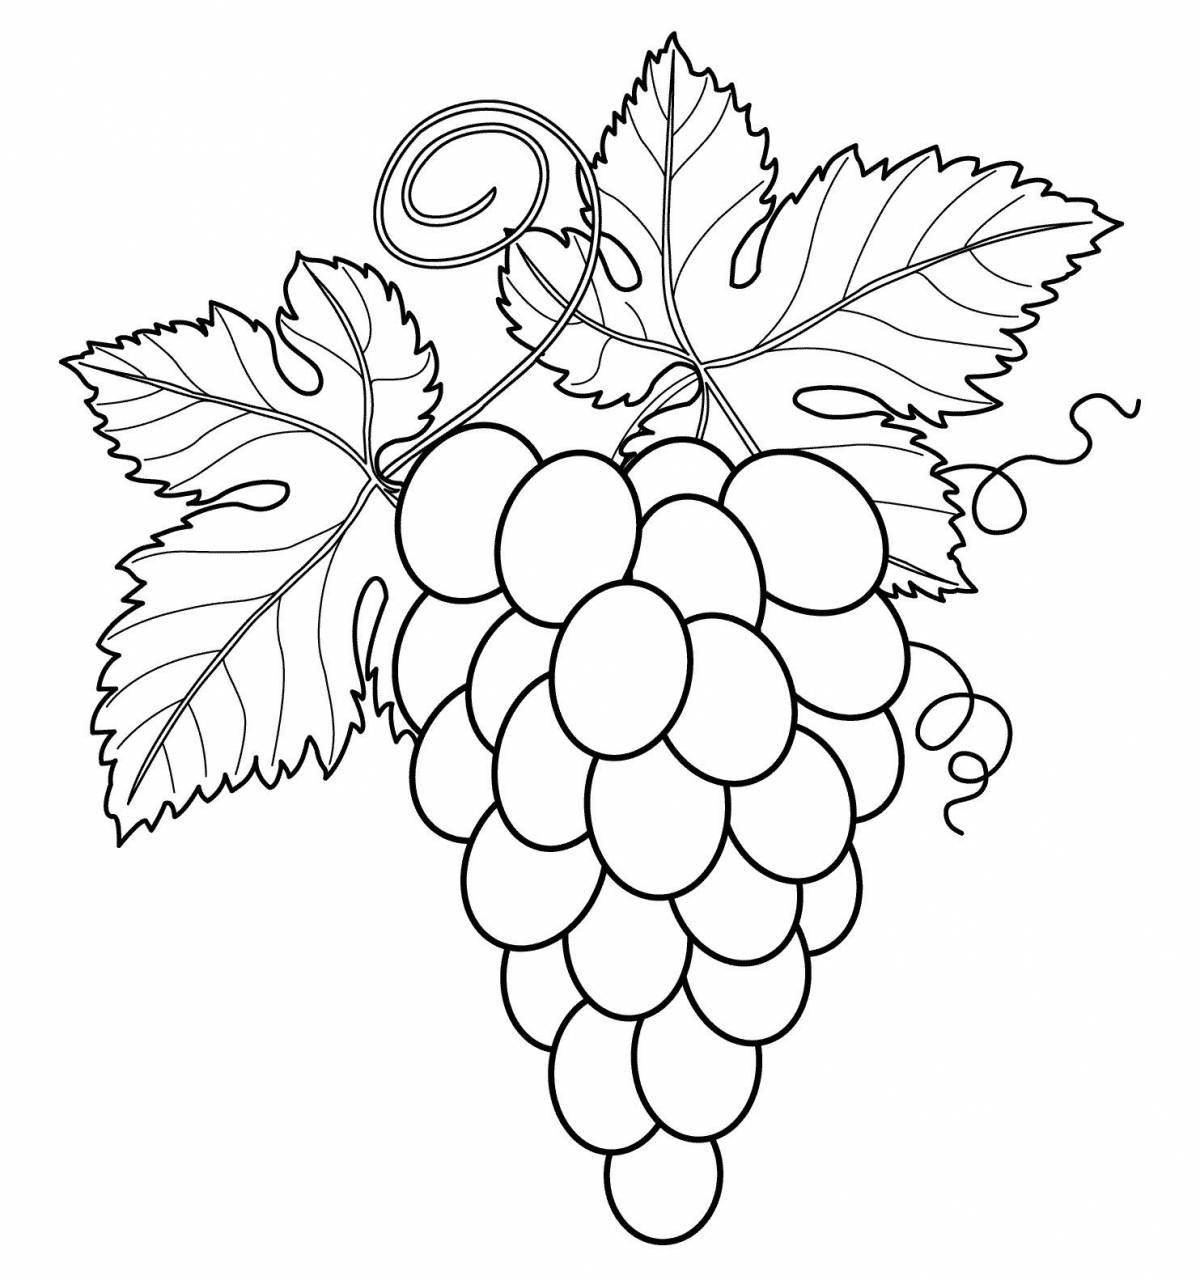 Coloring grapes for kids